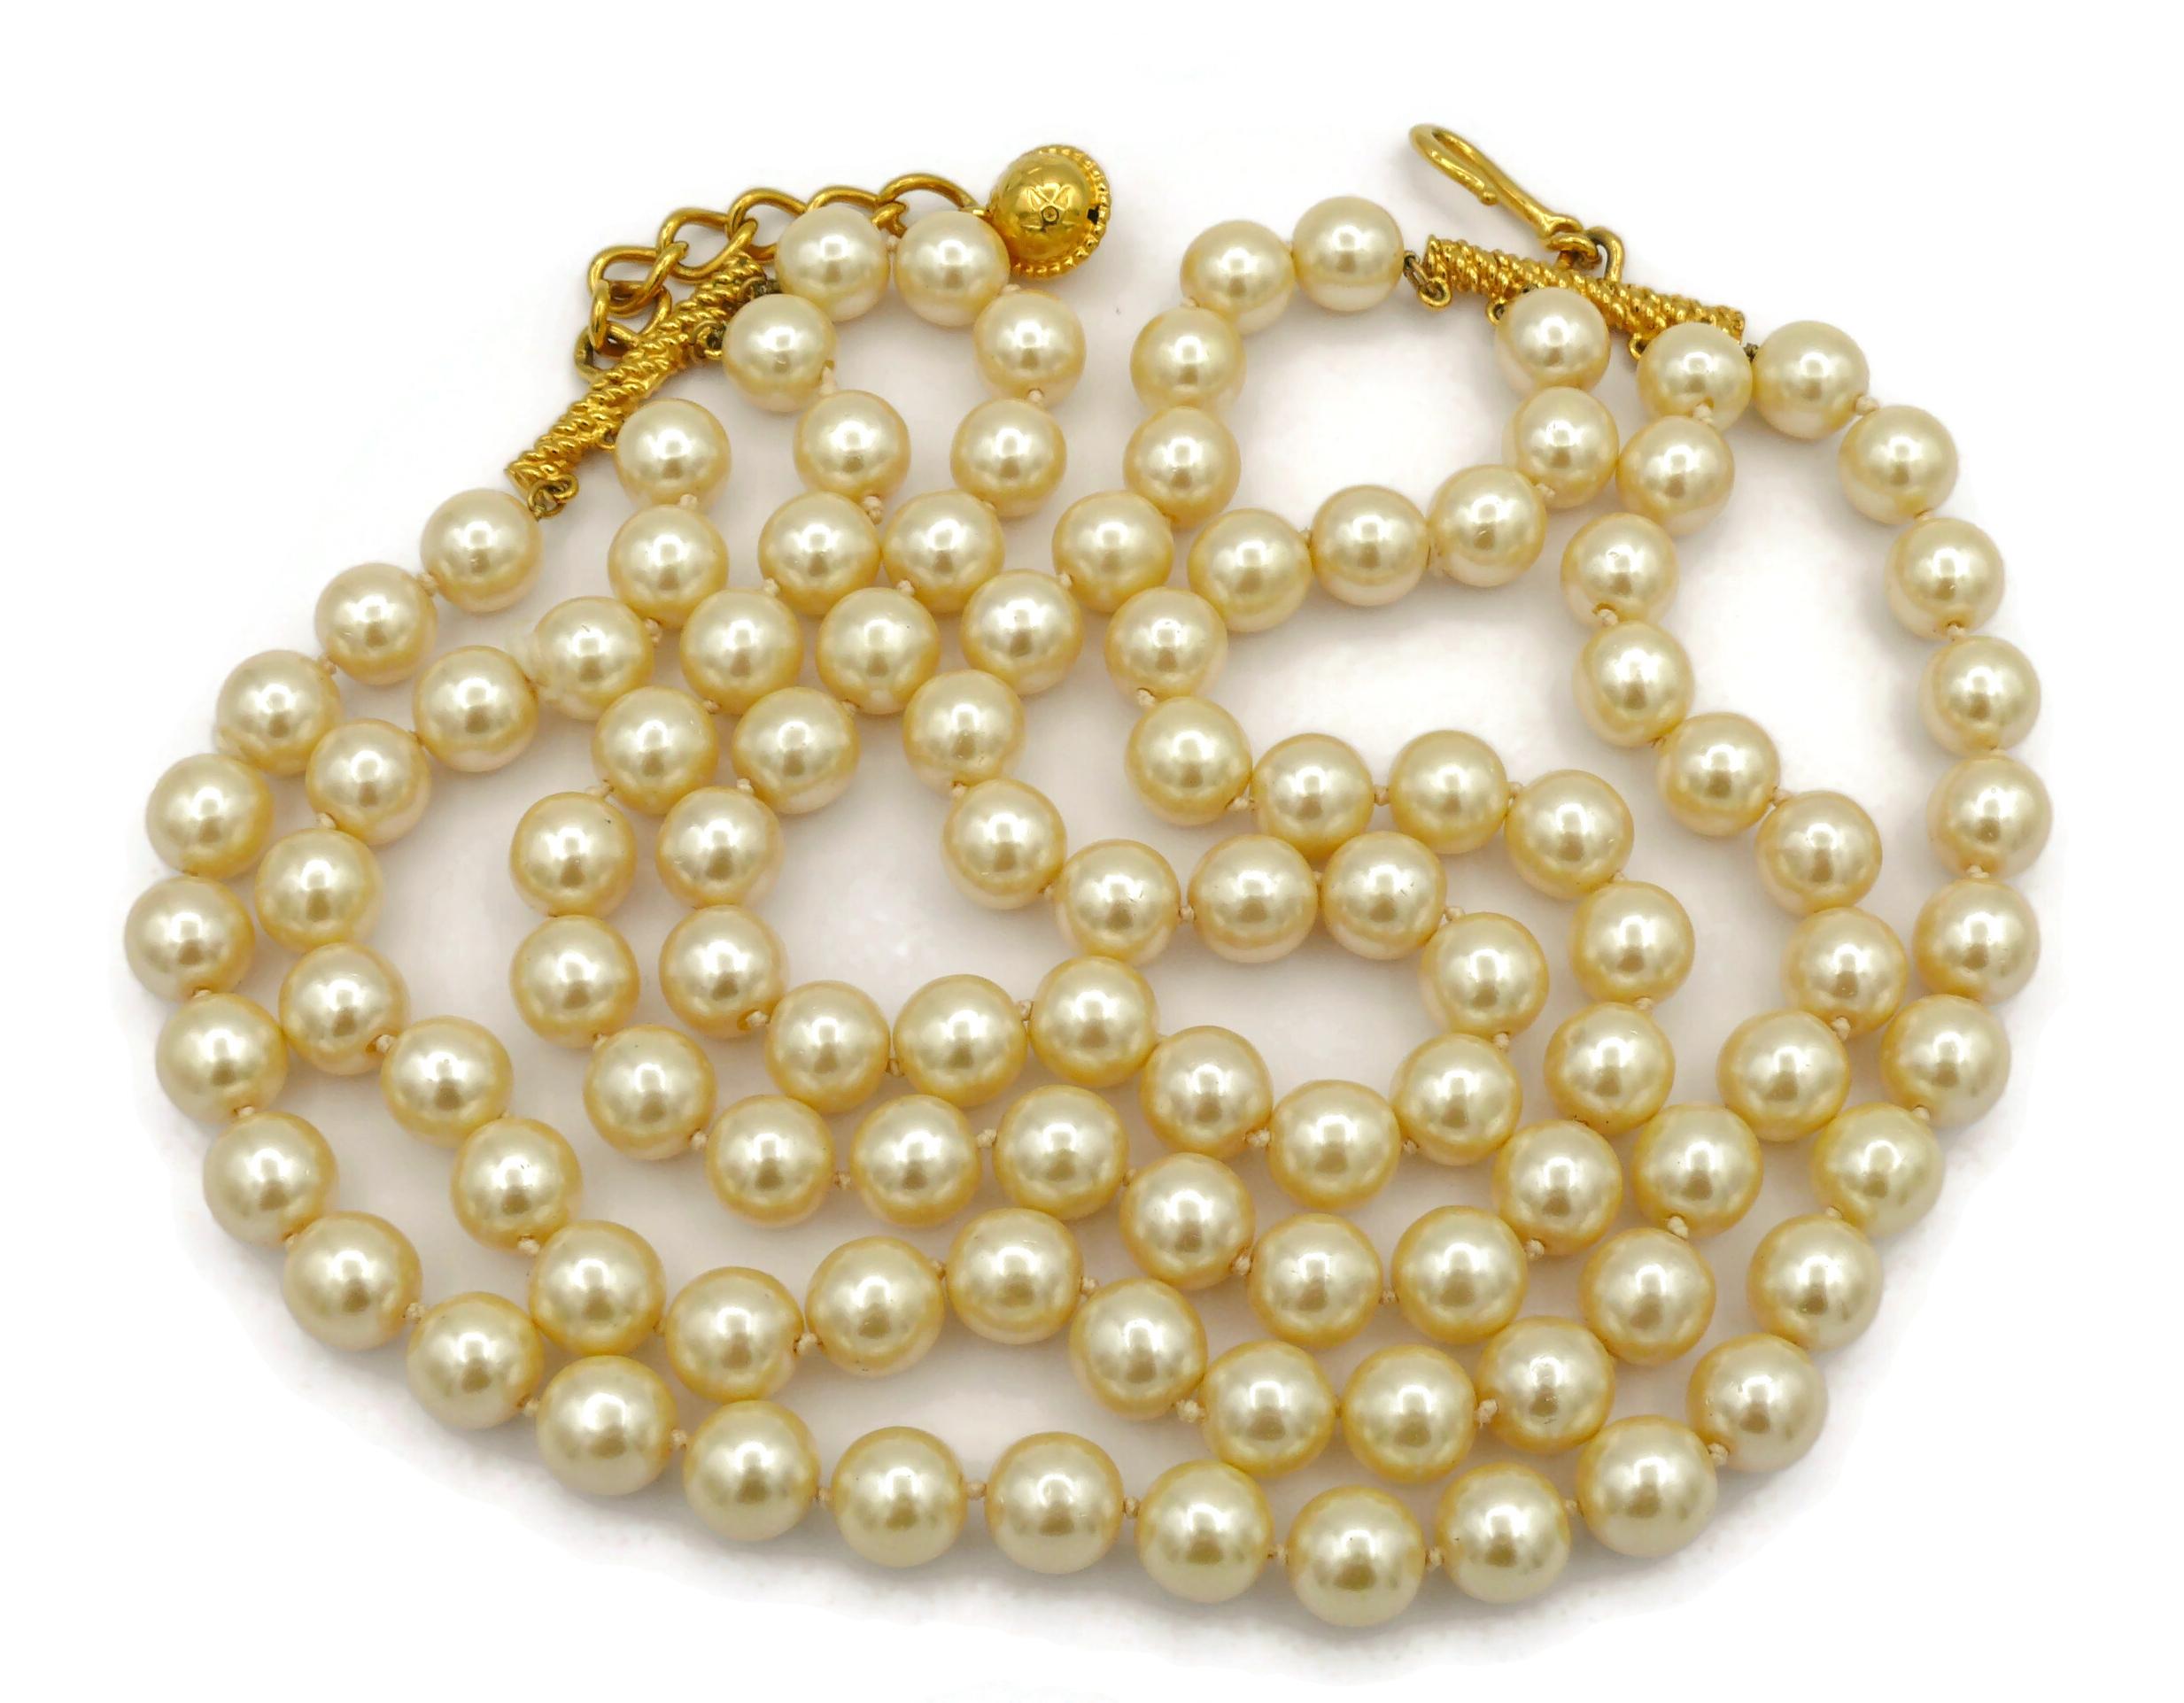 CELINE vintage glass pearl four strands necklace.

Adjustable hook closure.

Unmarked.
But very recognizable with the iconic CELINE planisphere charm.

Indicative measurements : adjustable length from approx. 47.5 cm (18.70 inches) to approx. 51.5